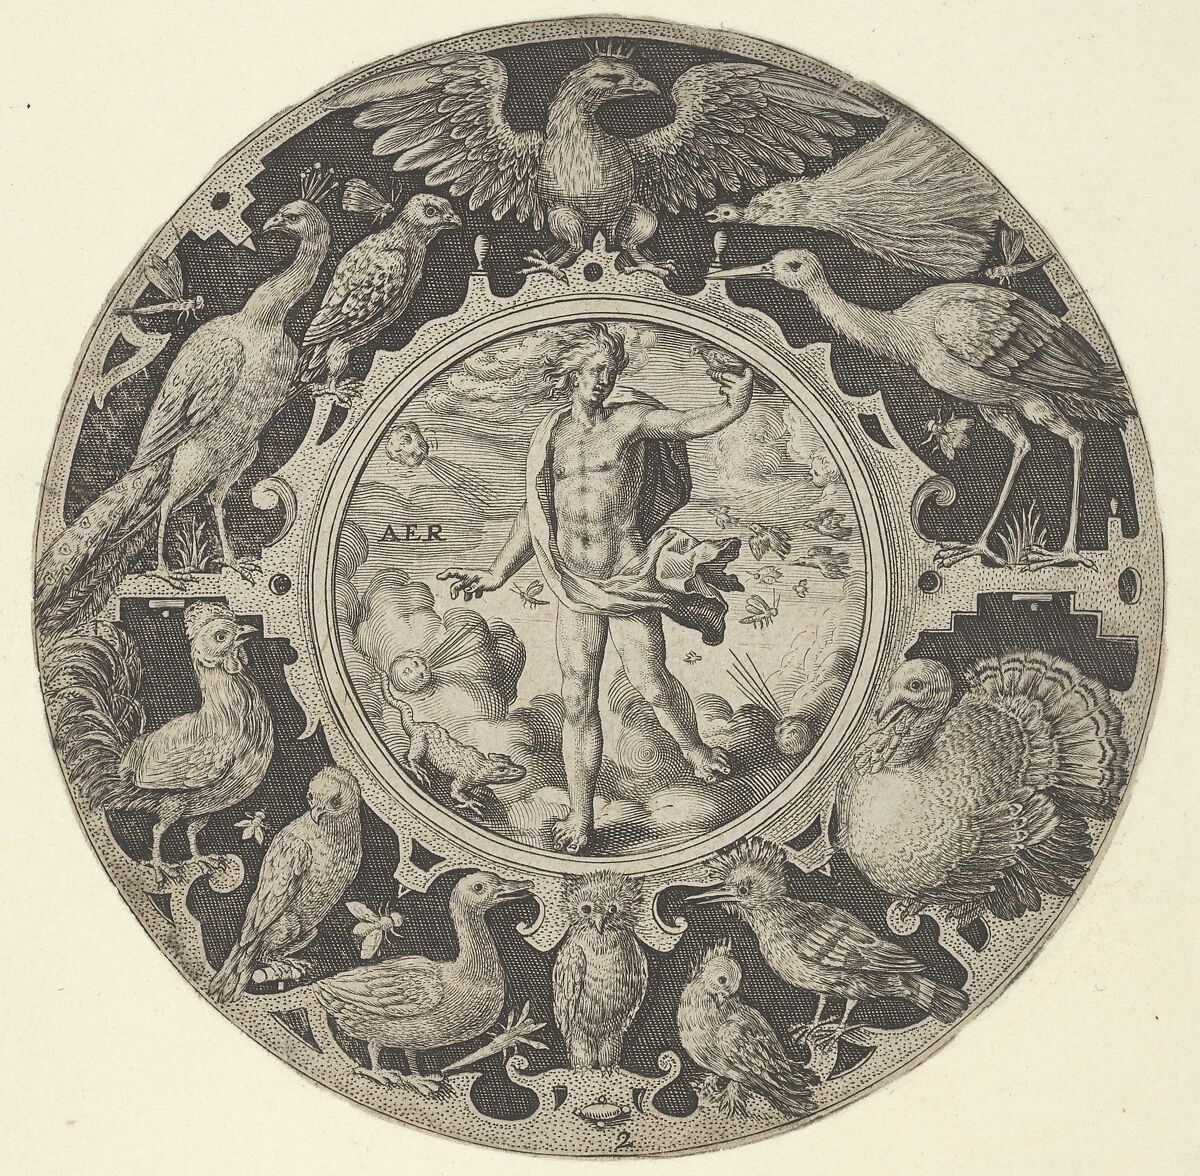 'Aer' in a Decorative Border with Birds, from a Series of Circular Designs with the Four Elements, Crispijn de Passe the Elder (Netherlandish, Arnemuiden 1564–1637 Utrecht), Engraving 